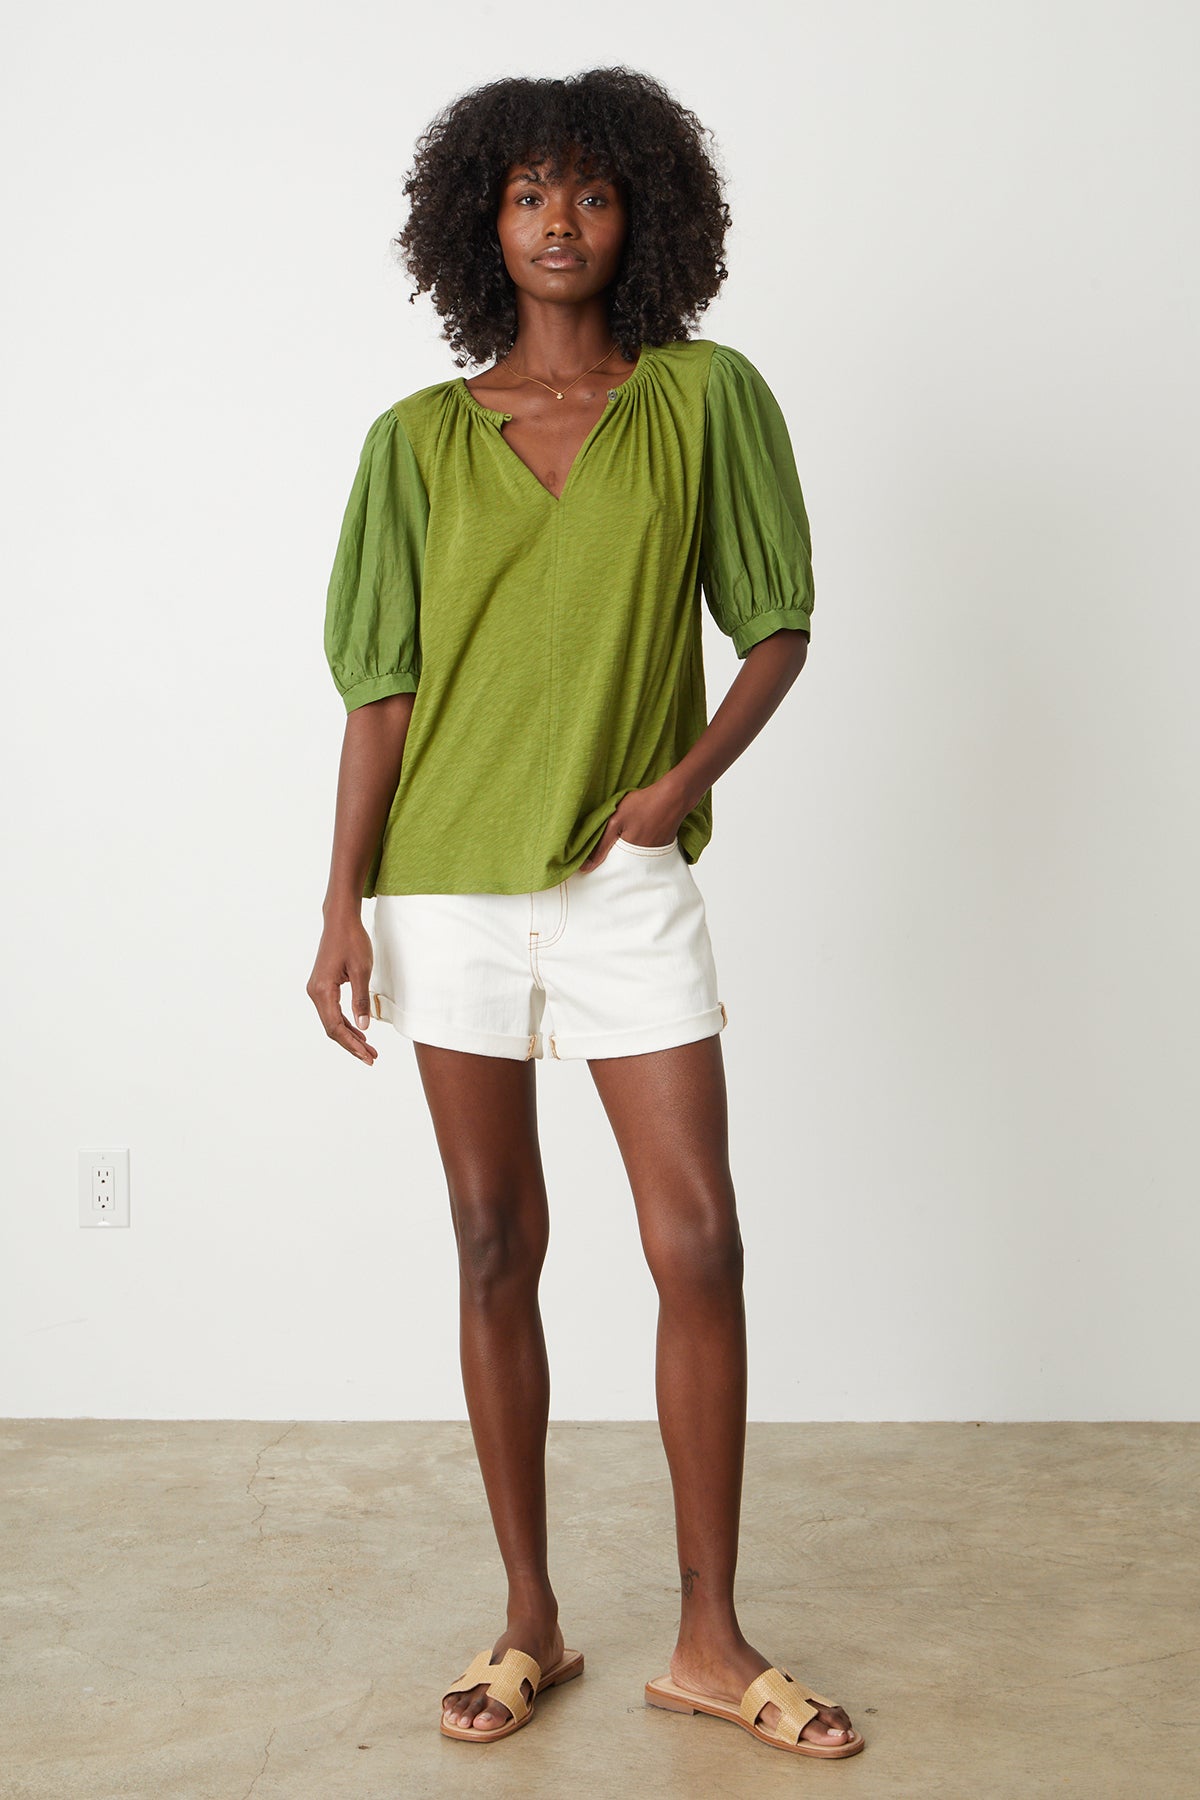 The model is wearing a MALLORY PUFF SLEEVE TOP by Velvet by Graham & Spencer and white shorts.-26255715696833